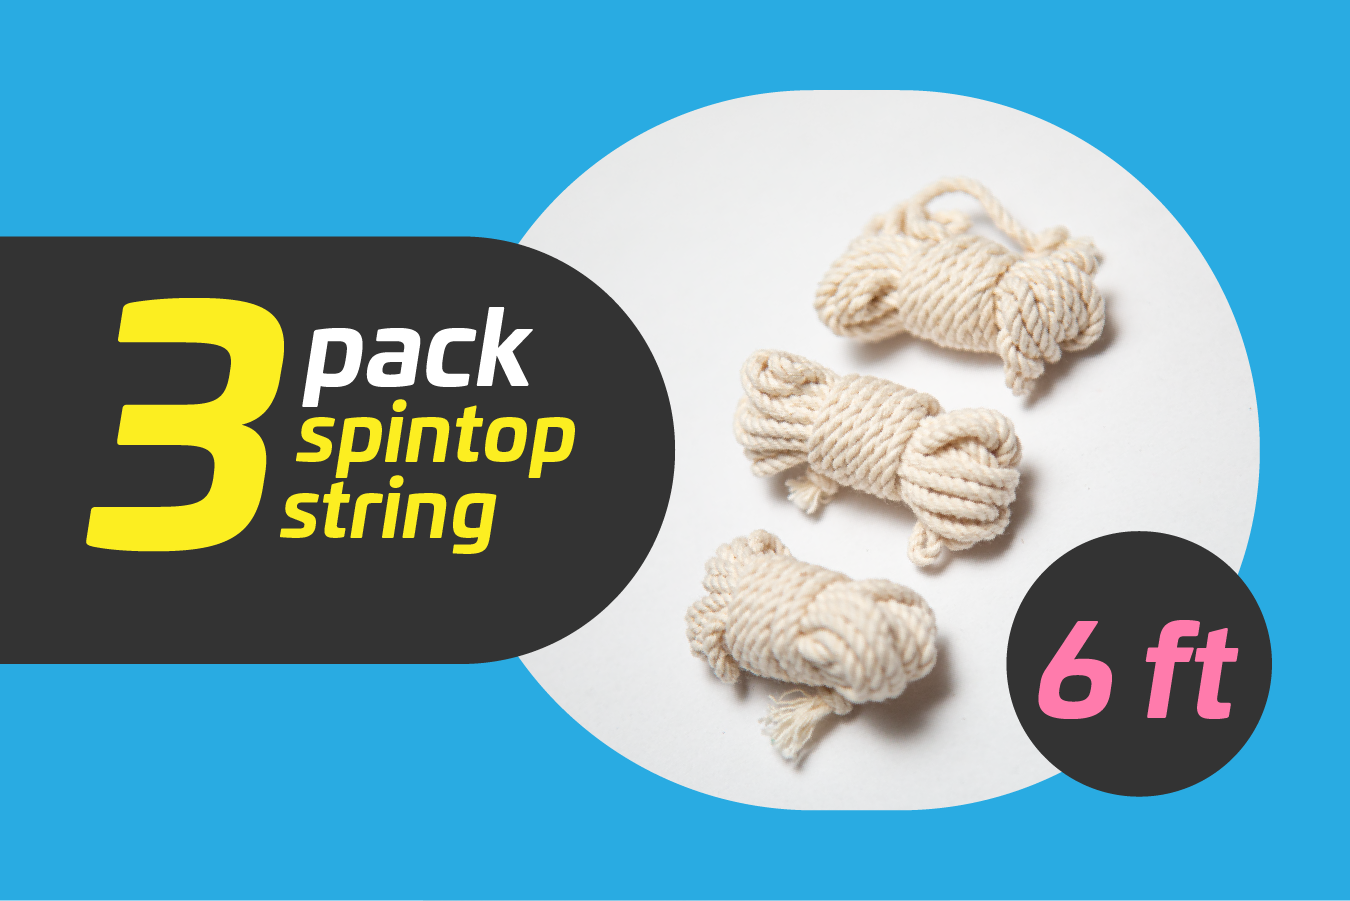 3 Pack Spintop String (Trompo String)